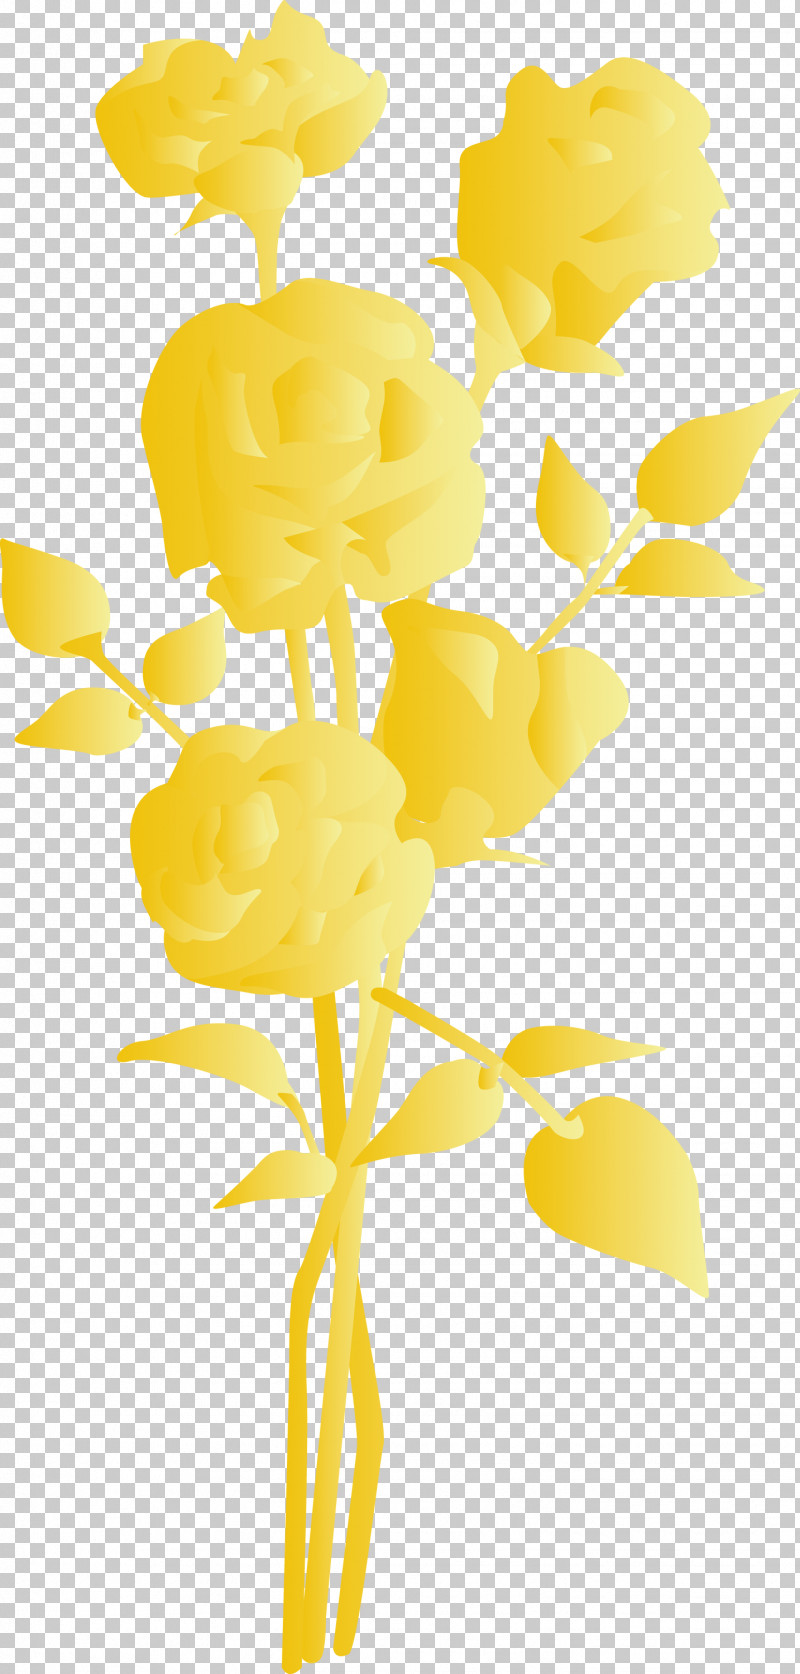 Yellow Cut Flowers Flower Plant Pedicel PNG, Clipart, Cut Flowers, Flower, Pedicel, Plant, Plant Stem Free PNG Download